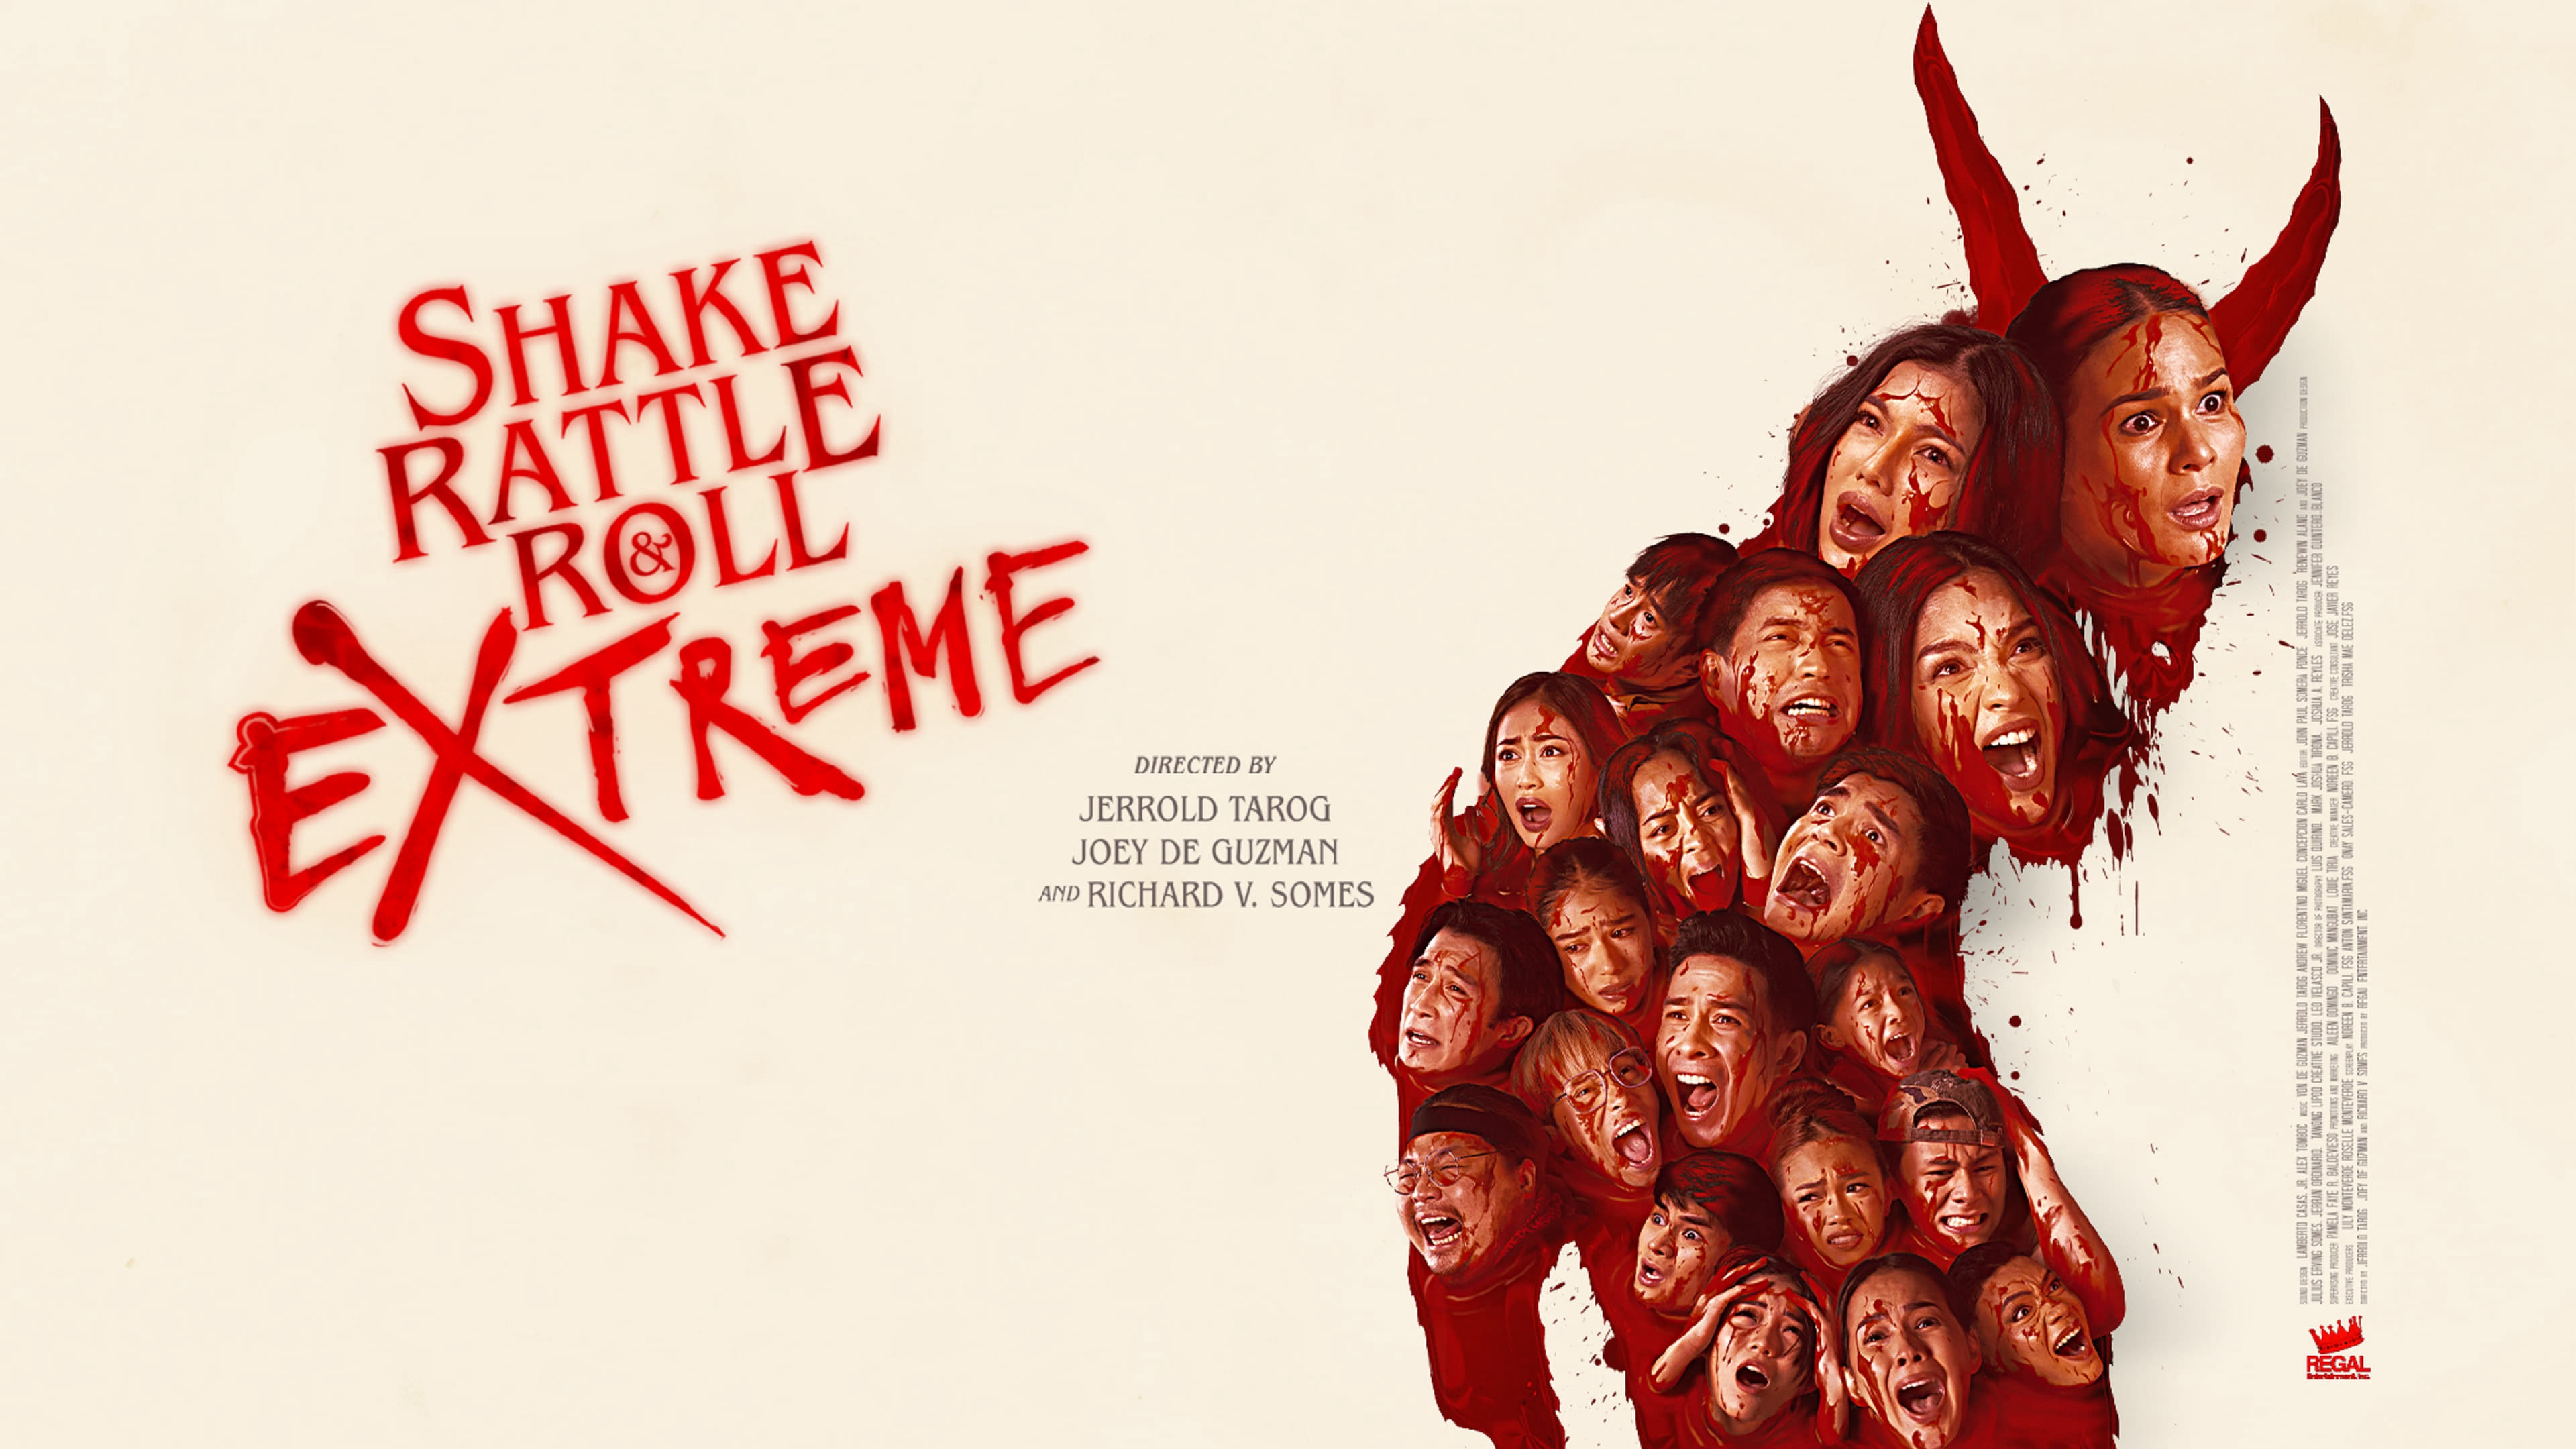 Shake, Rattle & Roll Extreme Shake, Rattle & Roll Extreme